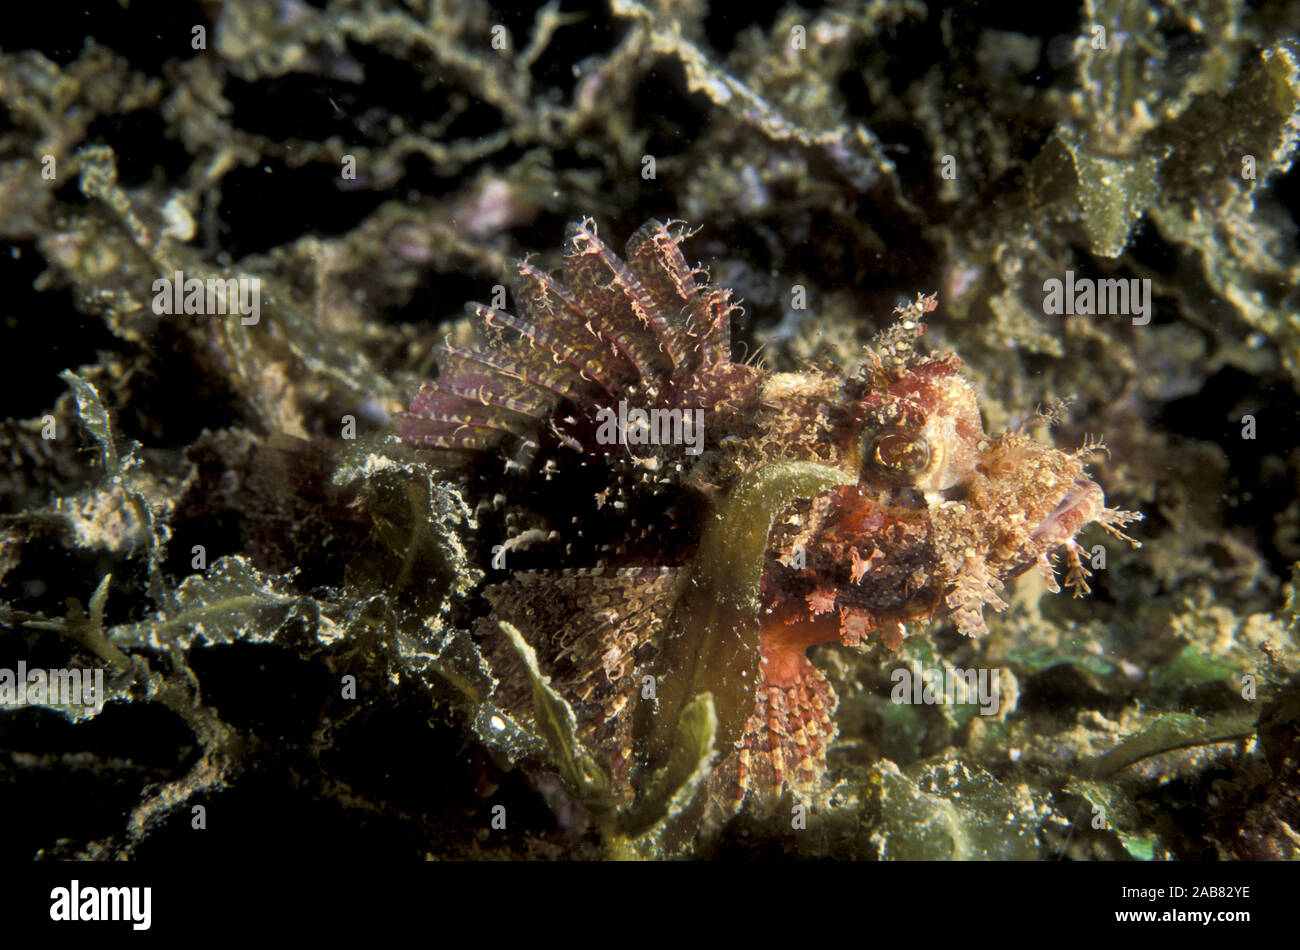 Tasselled scorpionfish (Scorpaenopsis oxycephala), possesses venomous fin spines and is bottom dweller, found widely in Central Pacific. Port Moresby, Stock Photo